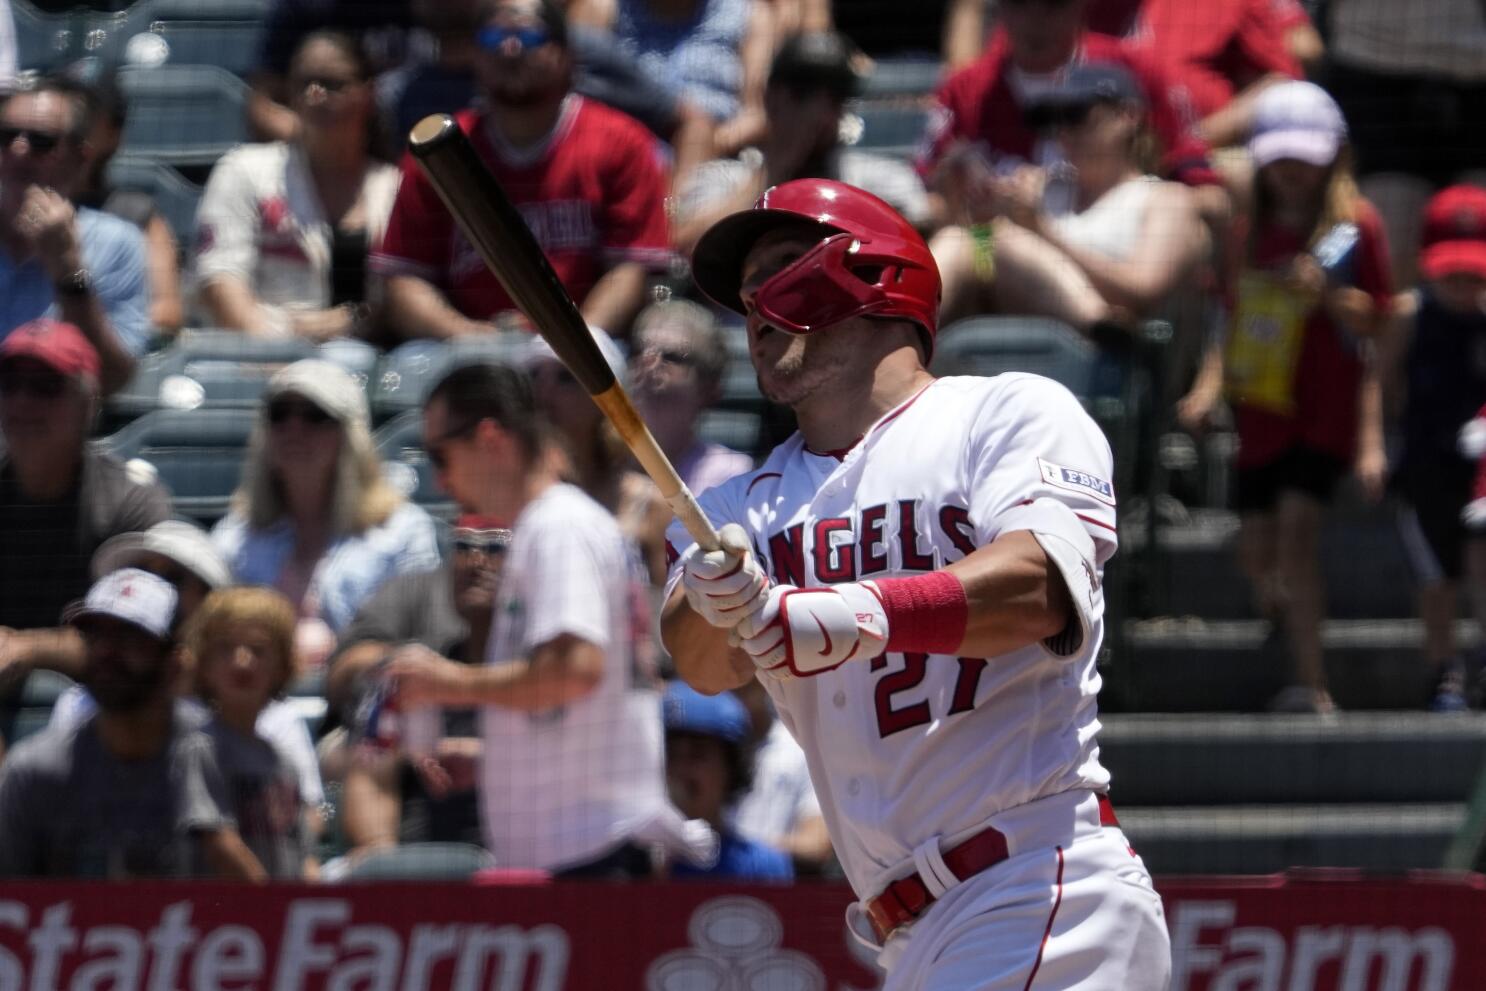 LEADING OFF: Angels star Trout set to draw a crowd in Philly